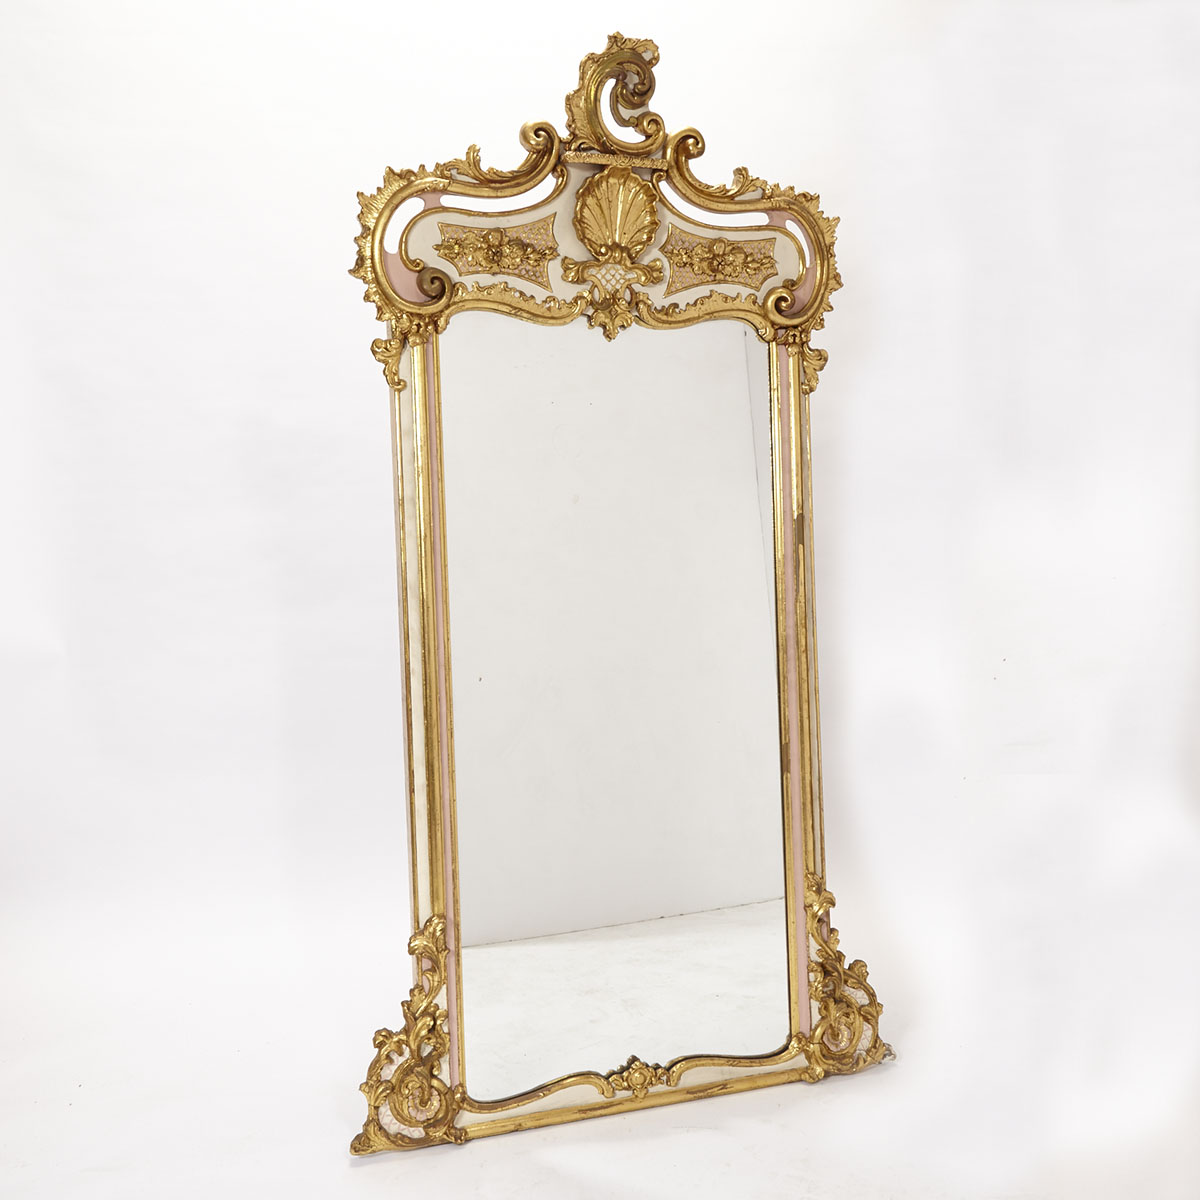 French Rococo Painted and Parcel Gilt Wood Pier Mirror, 19th/early 20th century